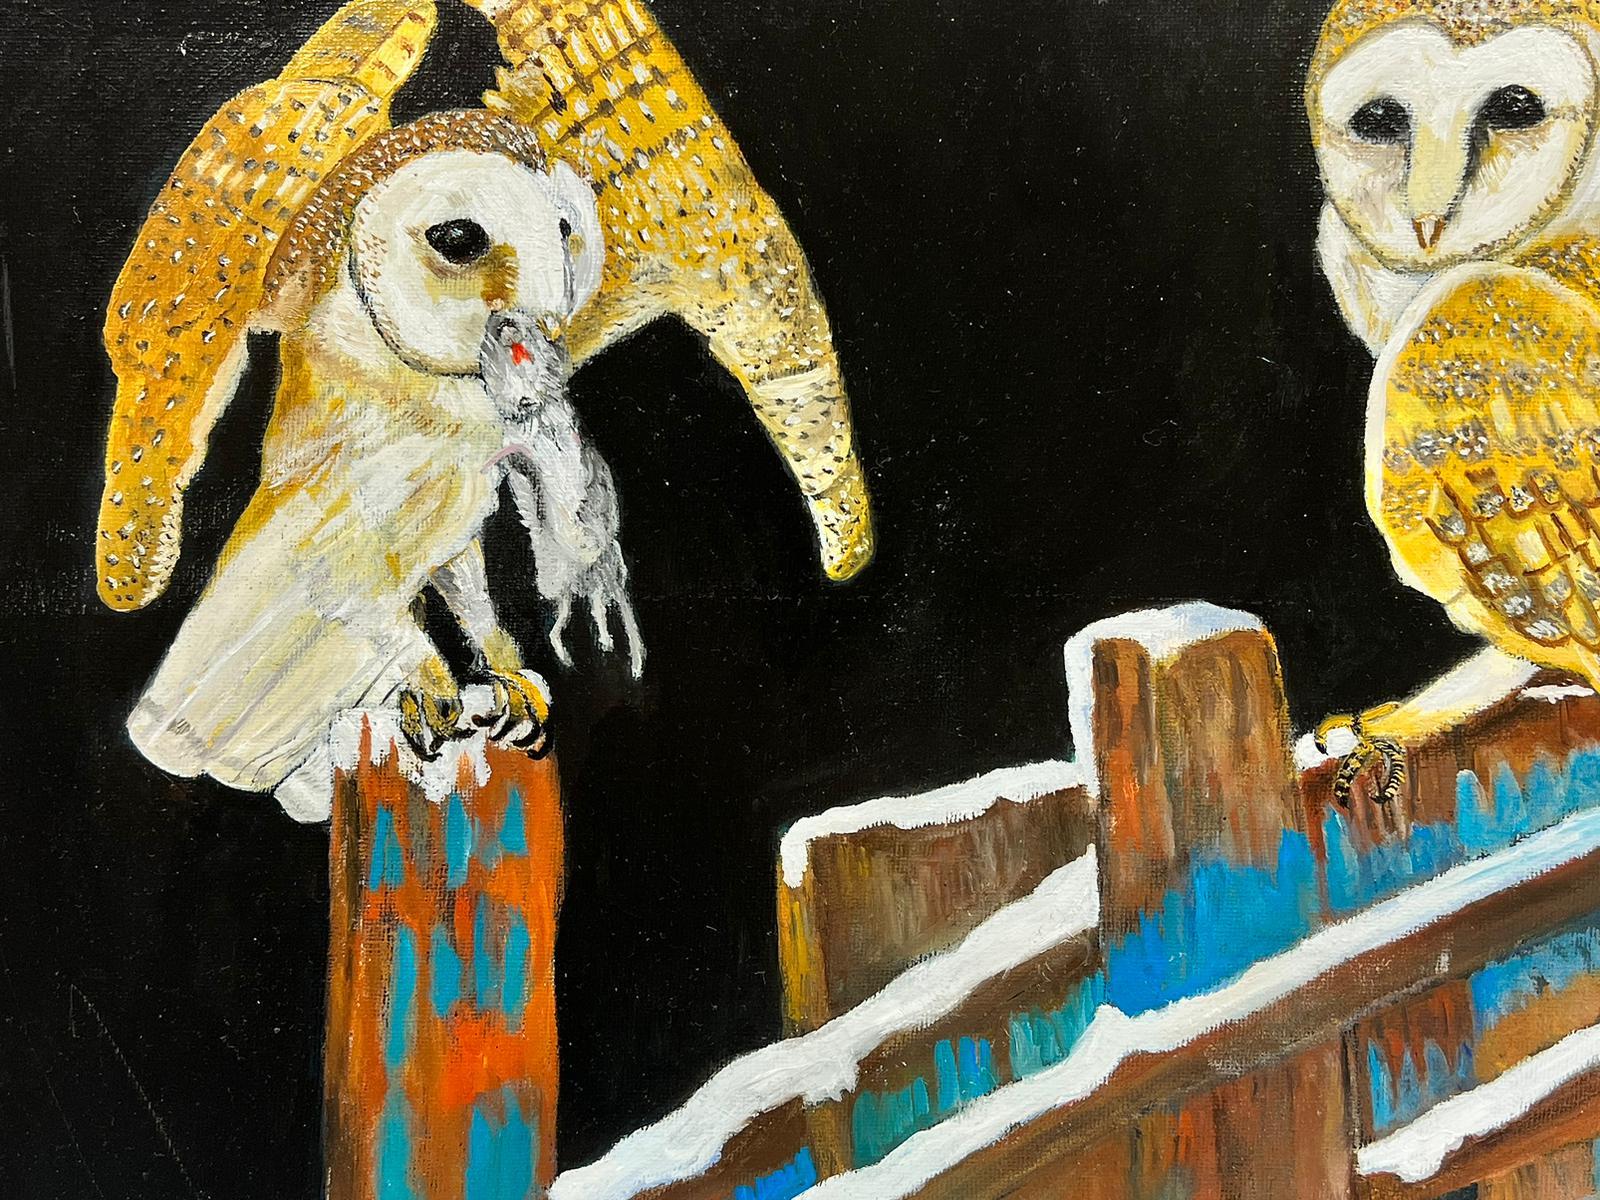 acrylic painting of owls